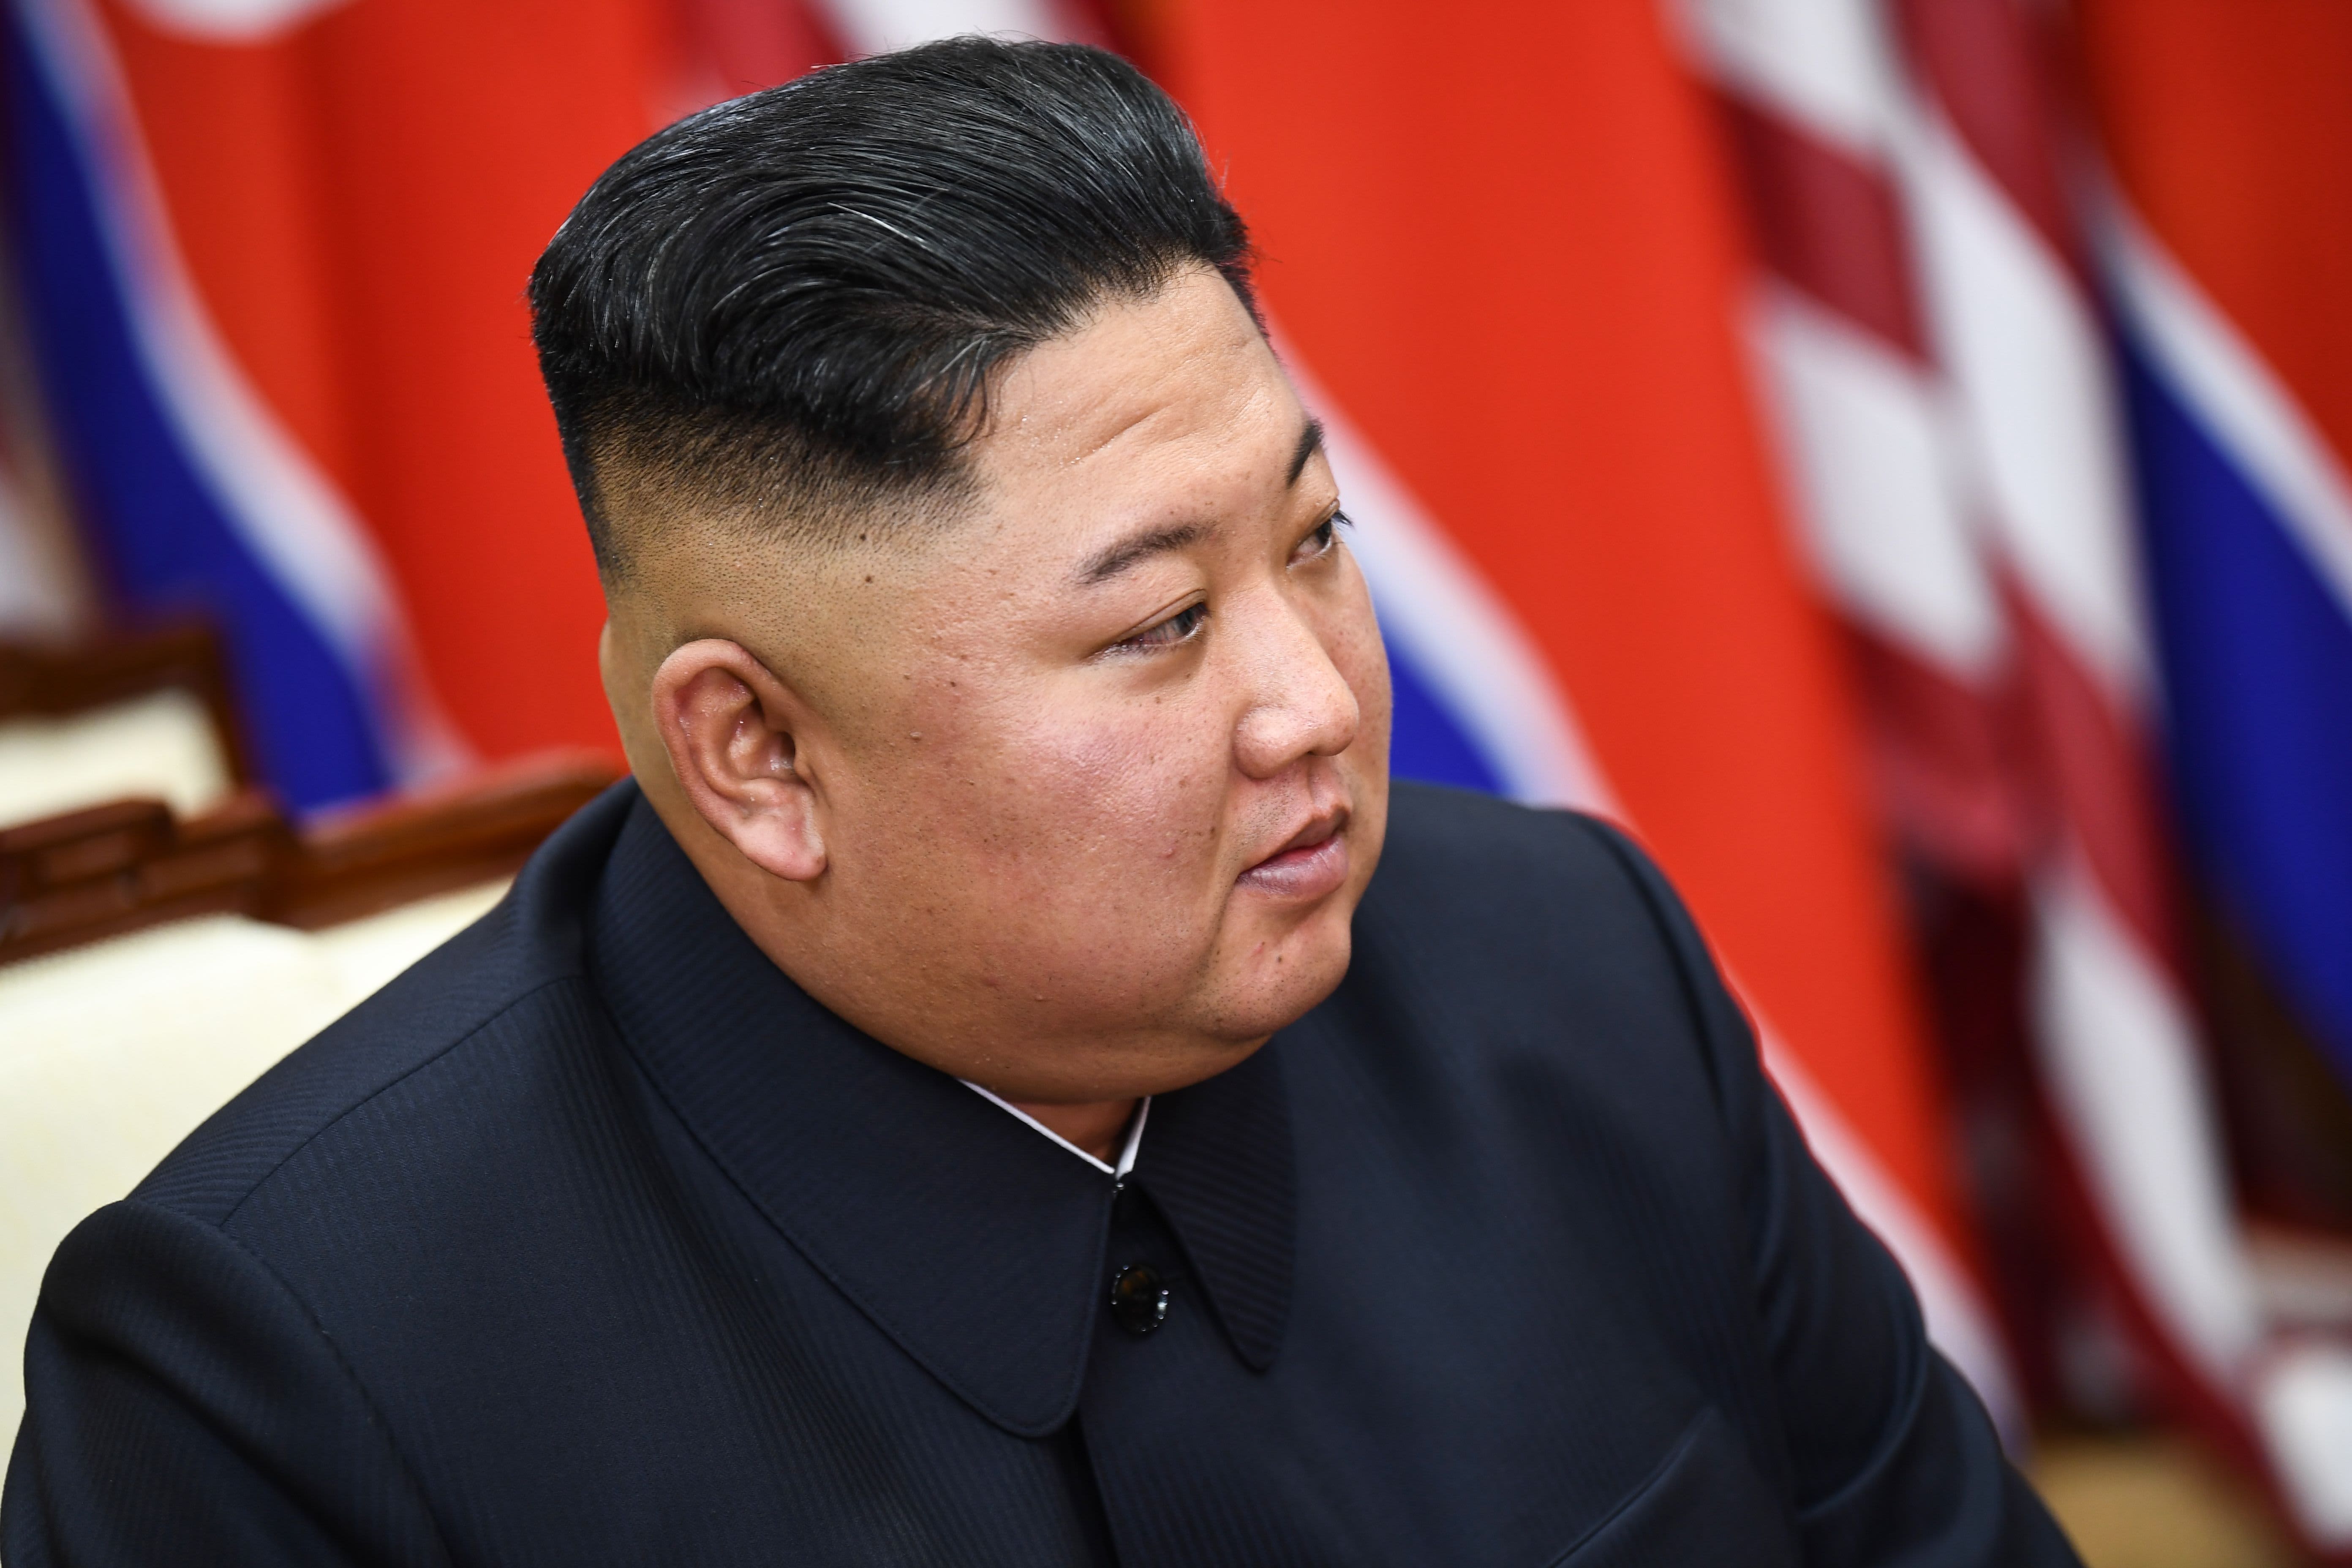 North Korea fired an unidentified projectile into the sea, South Korea says